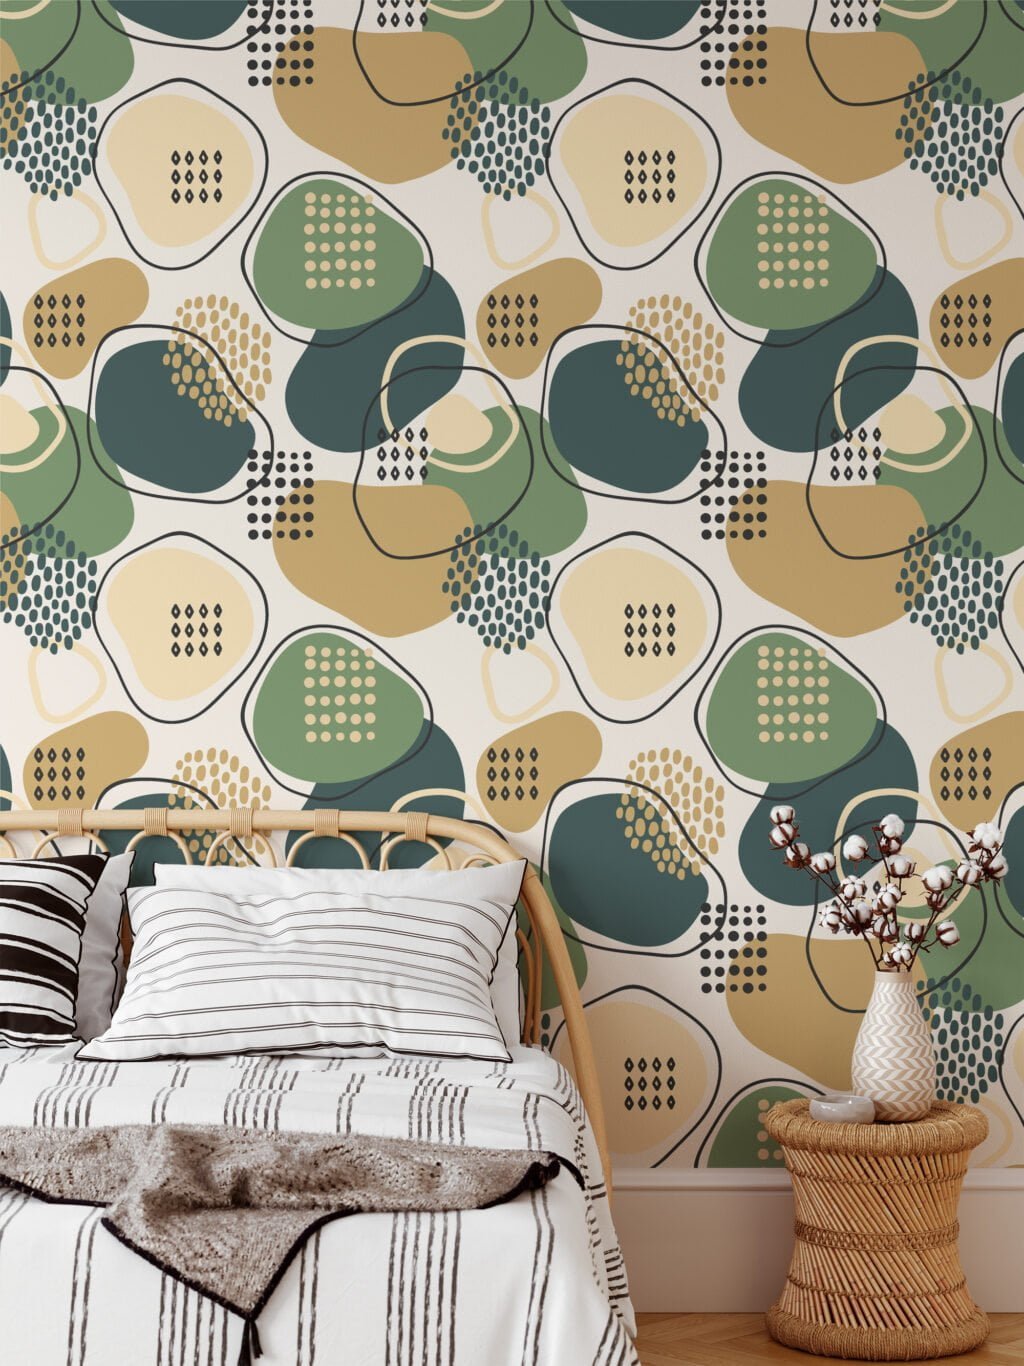 Abstract Shapes And Speckles Illustration Wallpaper, Geometric Pattern Peel & Stick Wall Mural